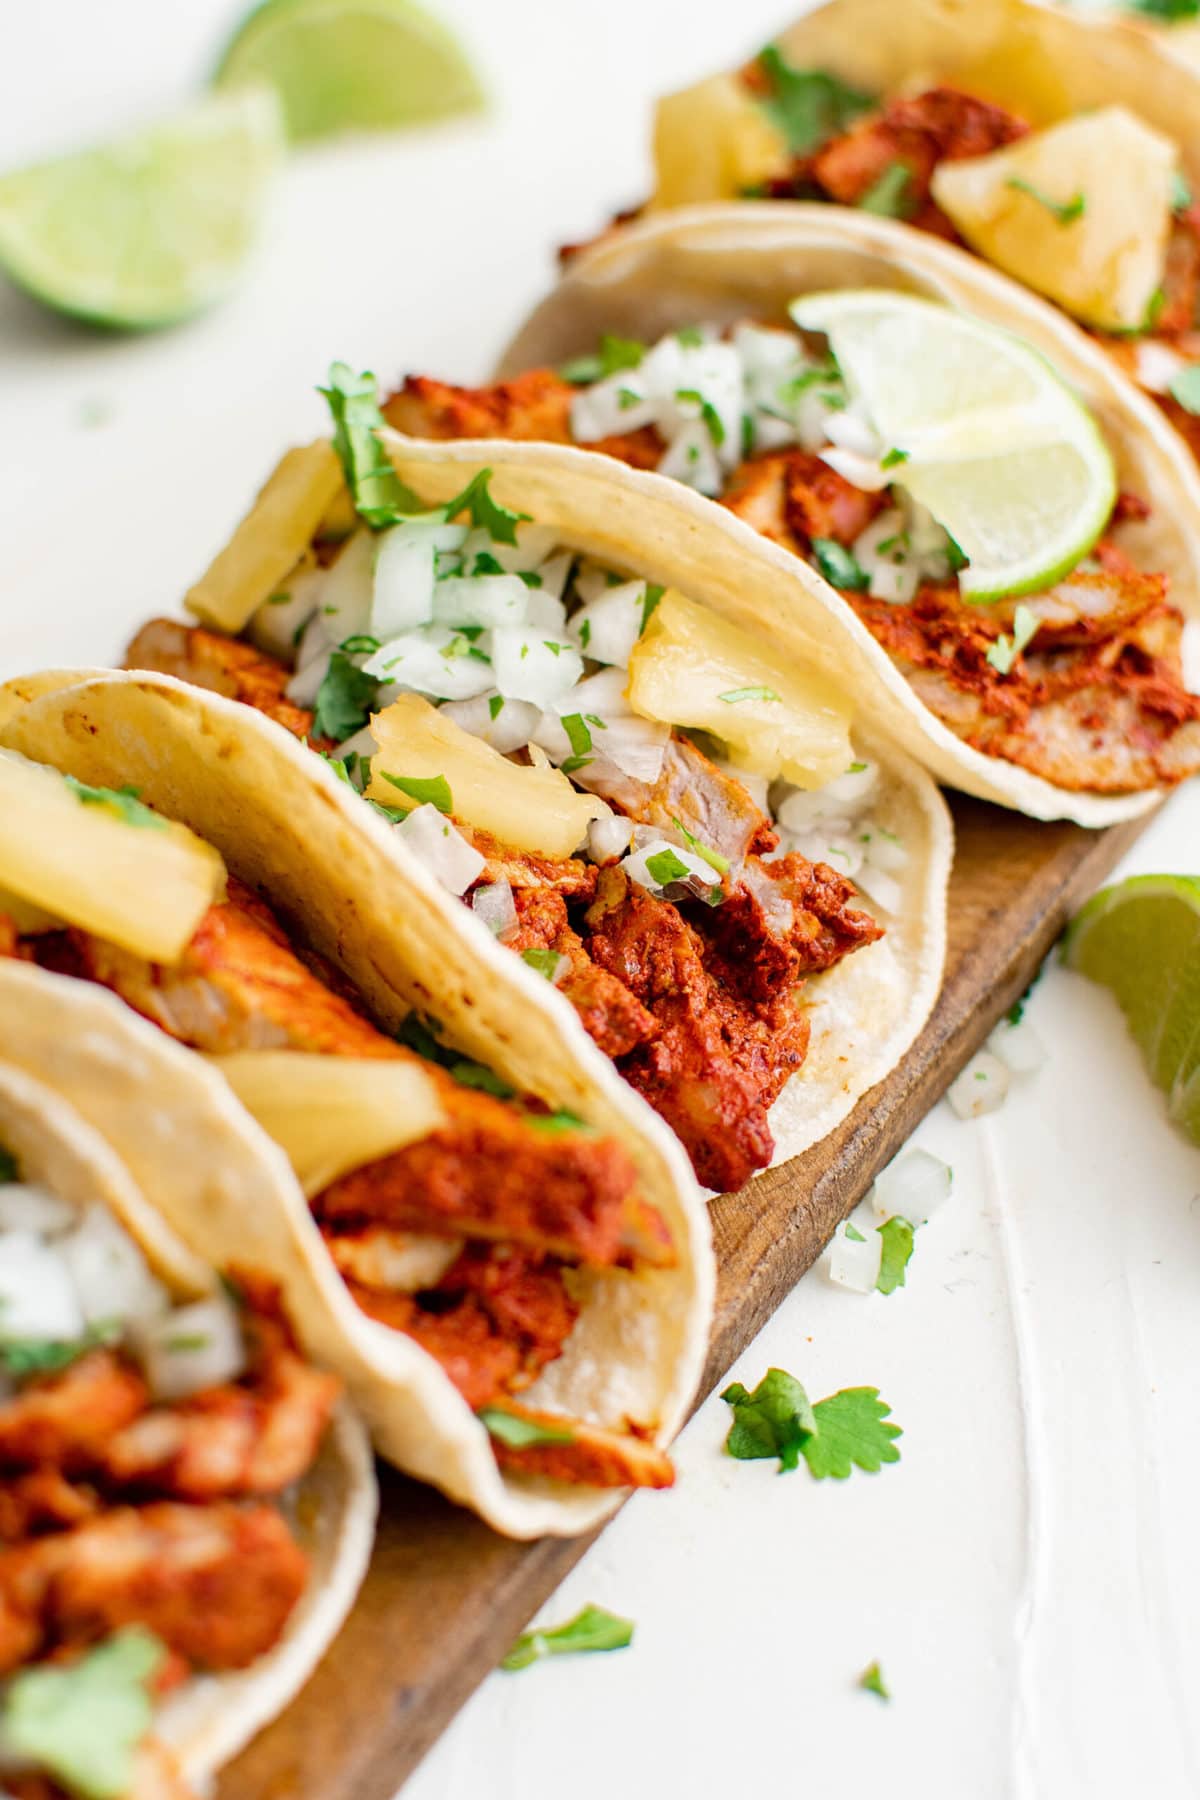 tacos al pastor with limes, pineapple and cilantro